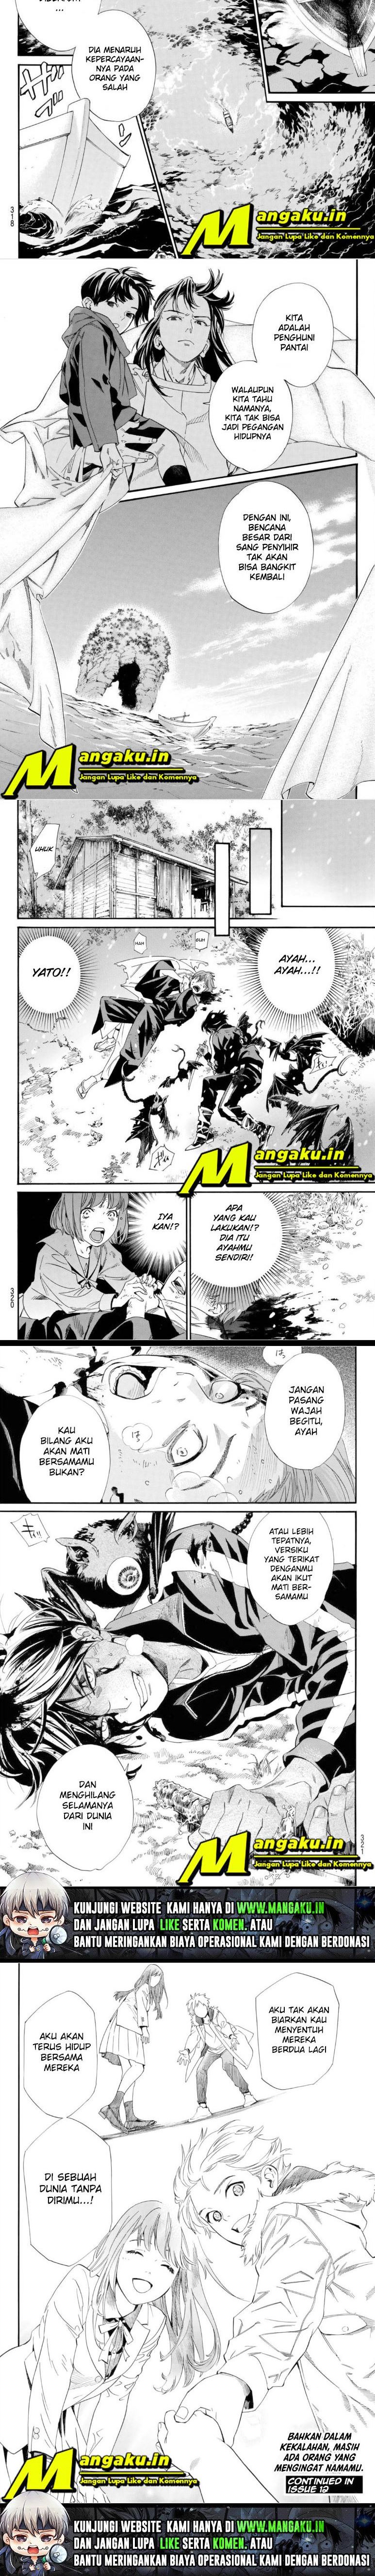 Noragami Chapter 102.2